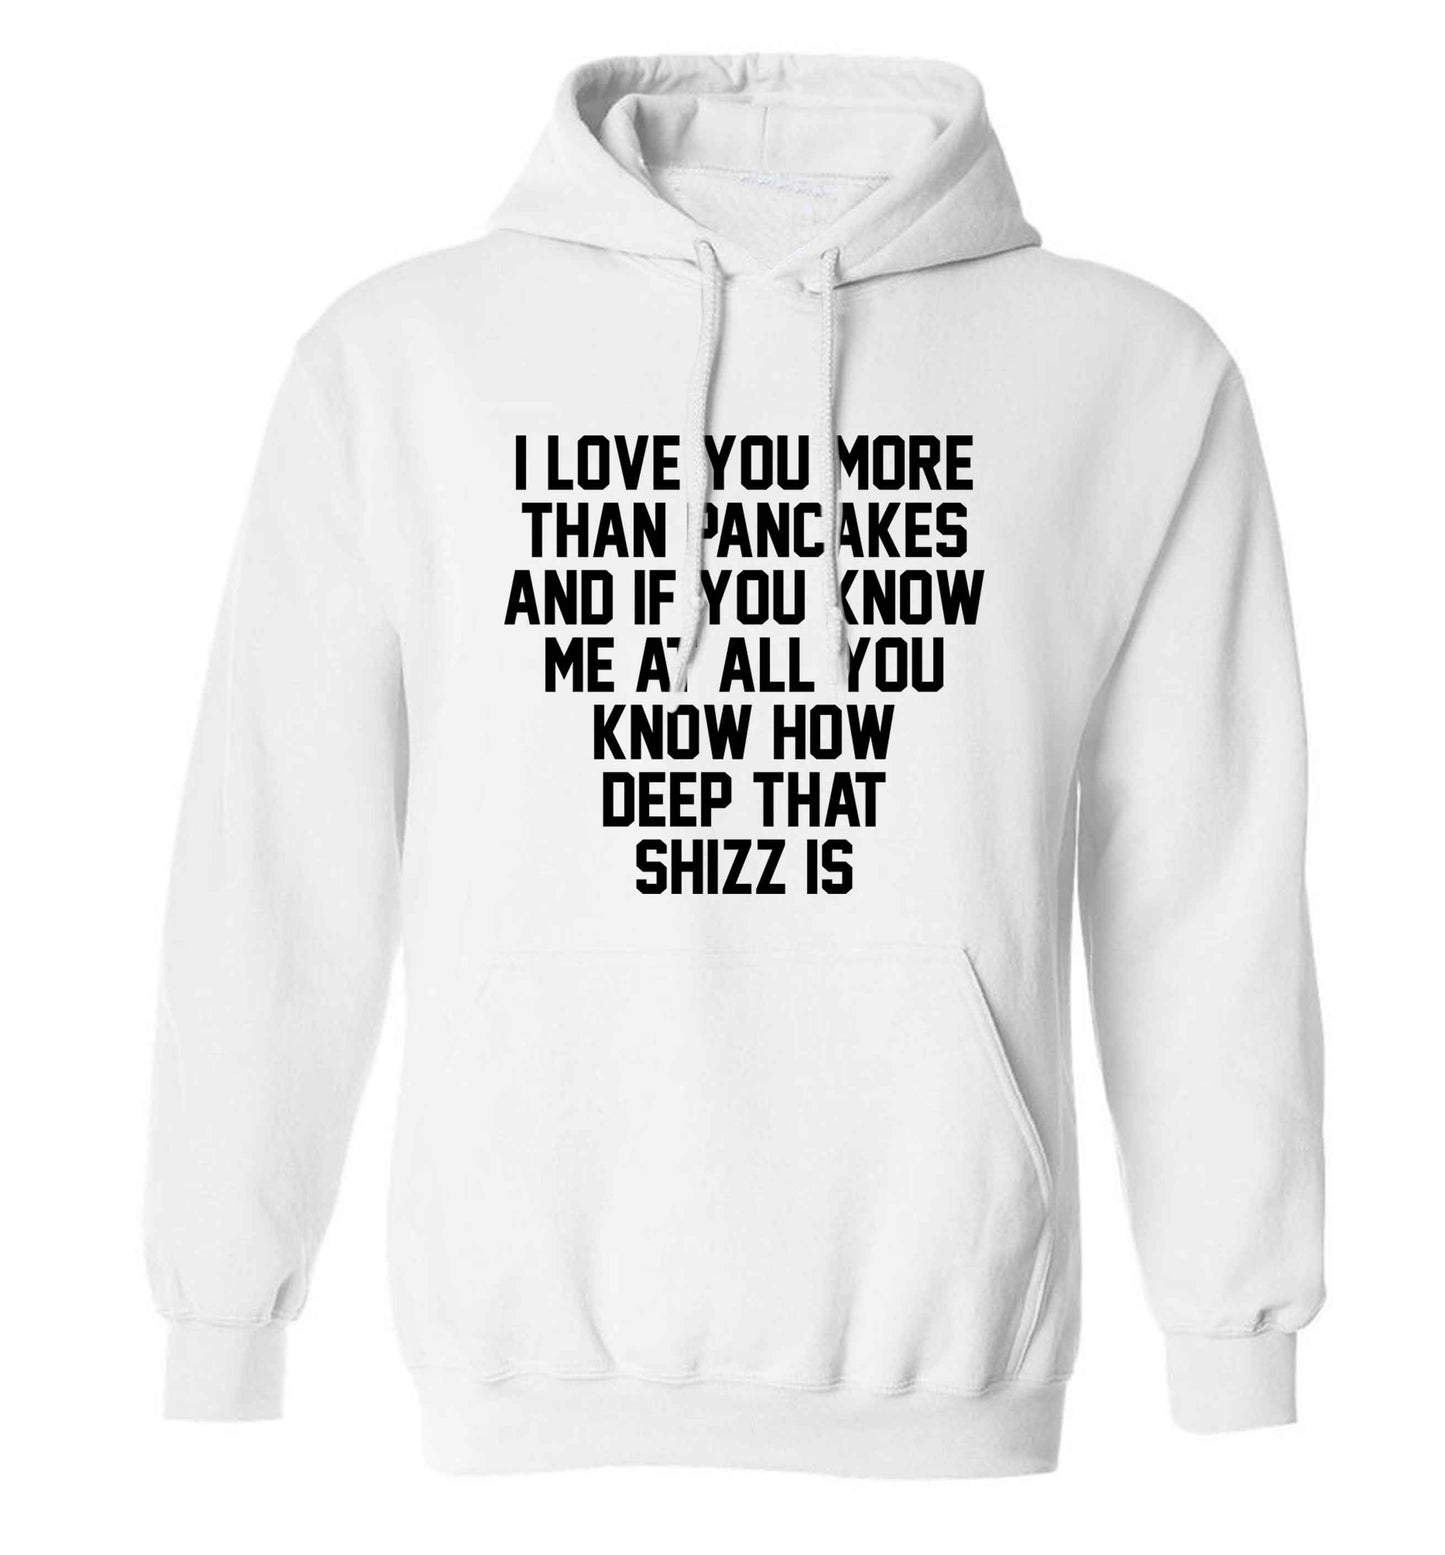 I love you more than pancakes and if you know me at all you know how deep that shizz is adults unisex white hoodie 2XL